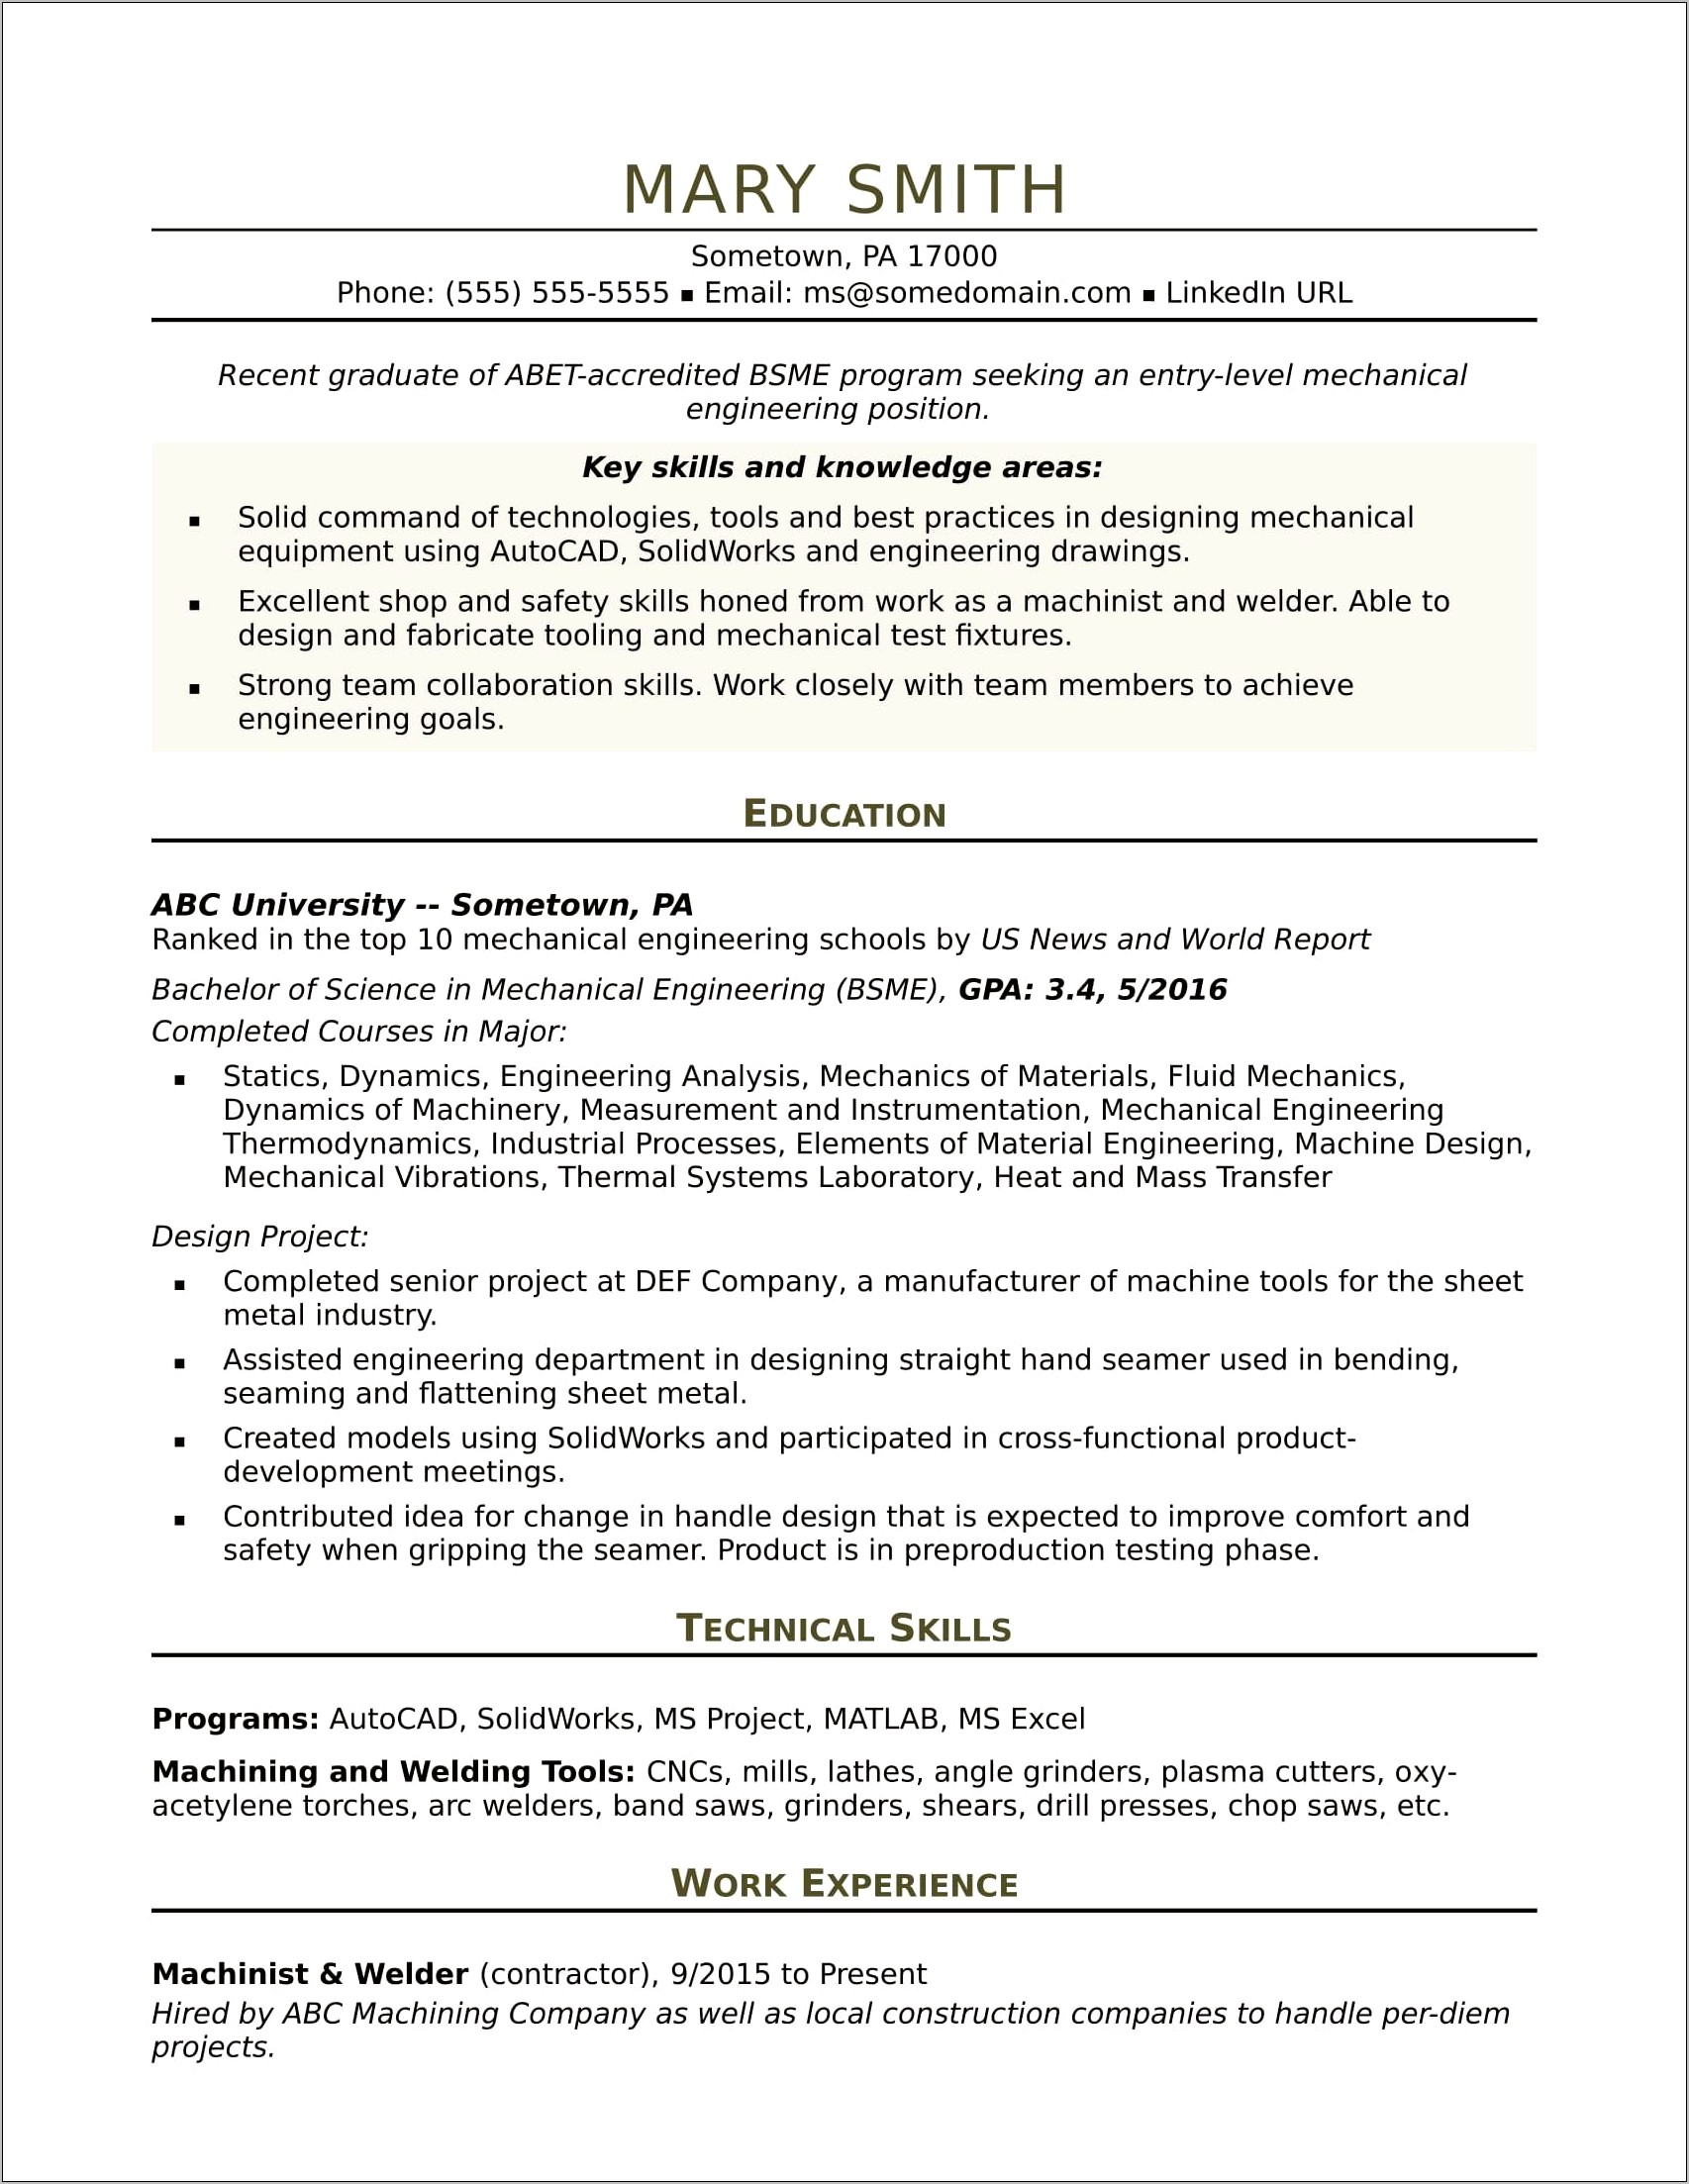 Cad Designer Experience With Metals Like Resume